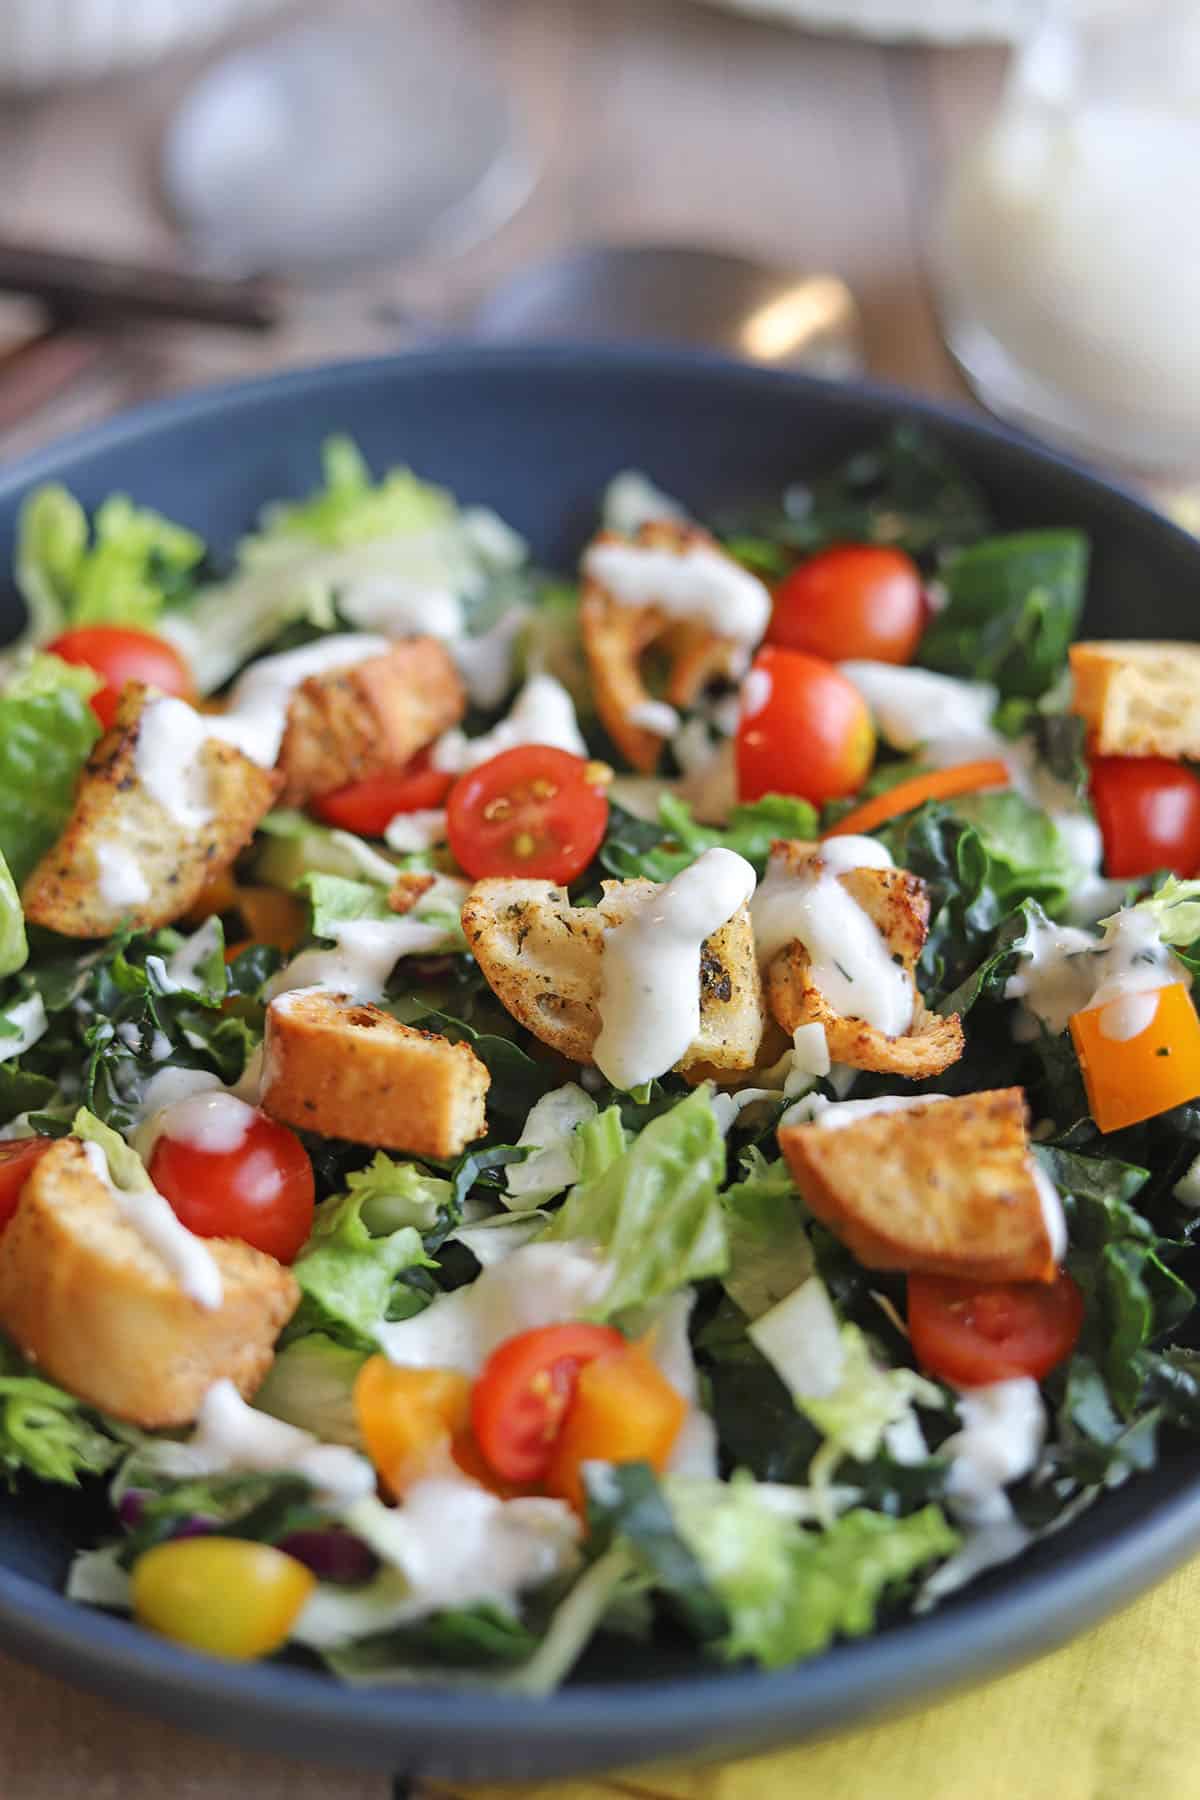 Close-up ranch dressing drizzled over homemade croutons in salad.